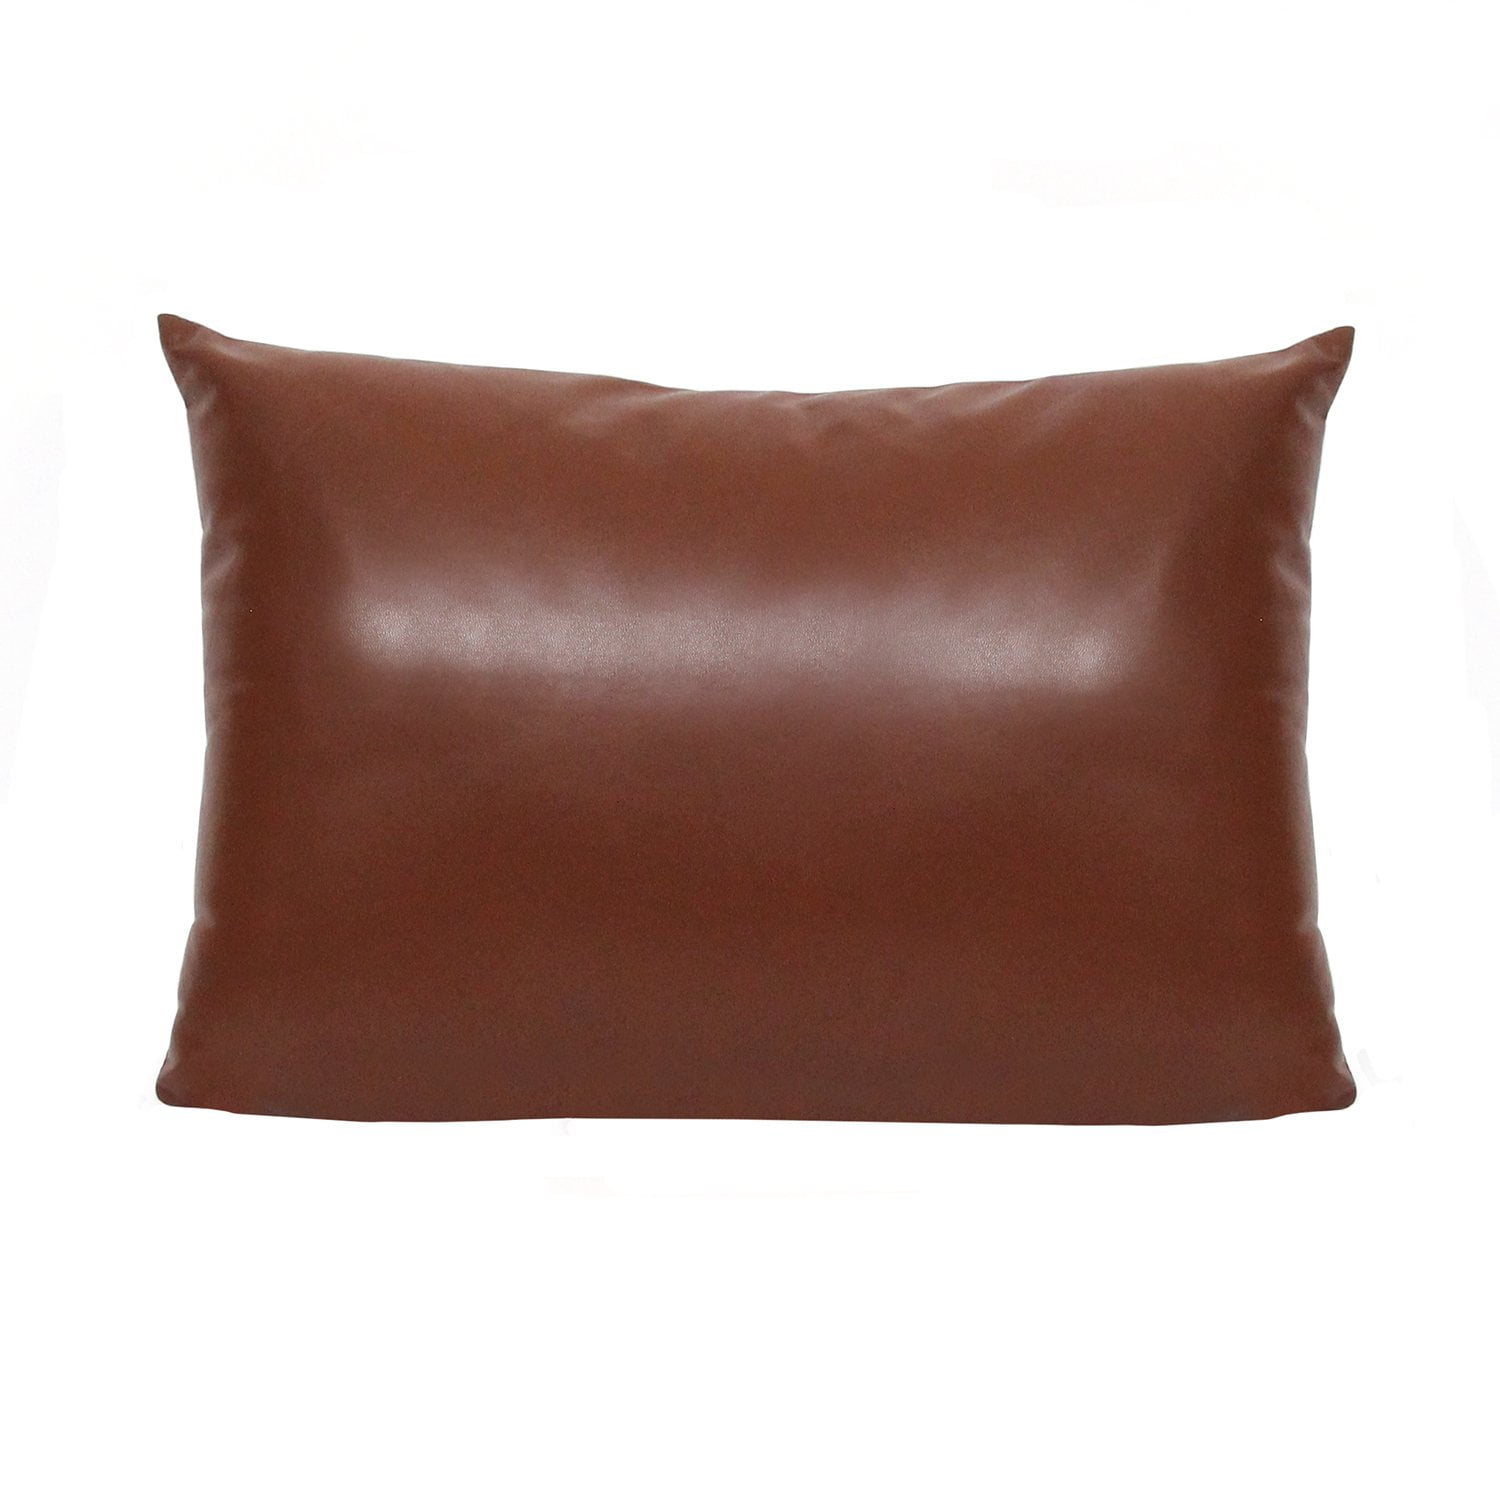 leather lumbar support cushion